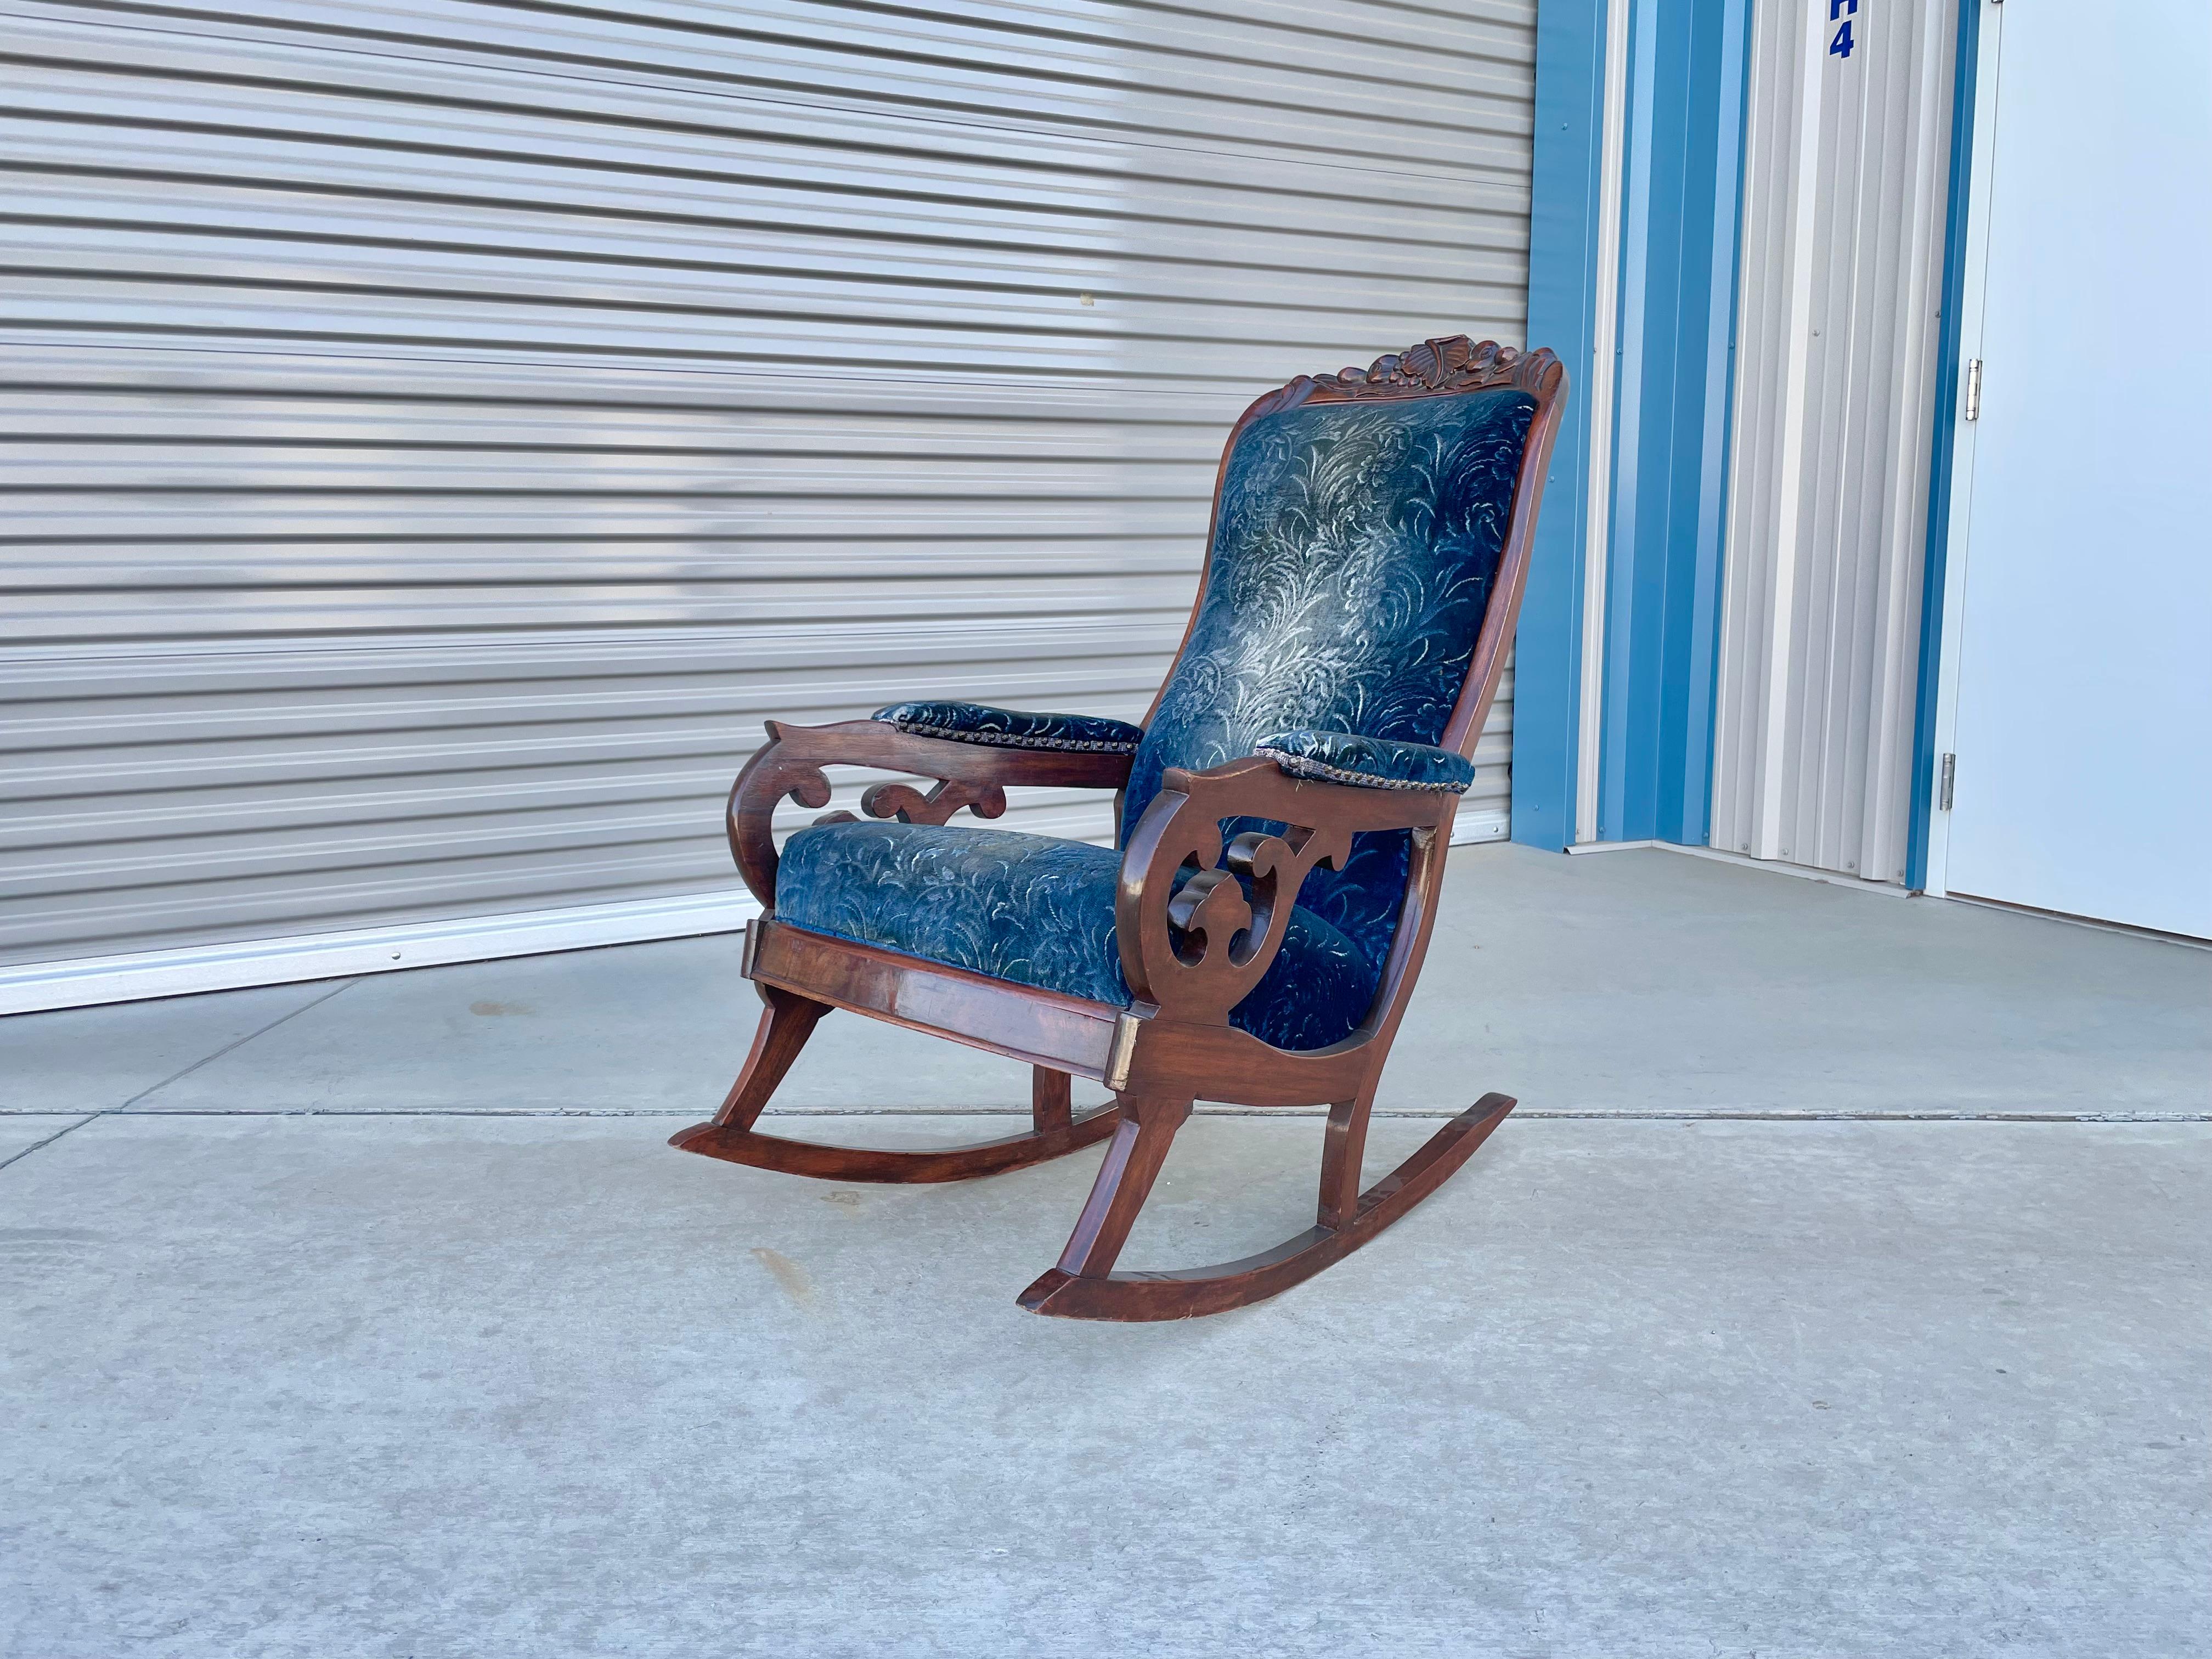 Vintage walnut rocking chair designed and manufactured by Biedermeier in Germany, circa 1940s. This beautiful rocker features a high back backrest that provides comfort and style. The chair also features a unique sculpture design on the walnut